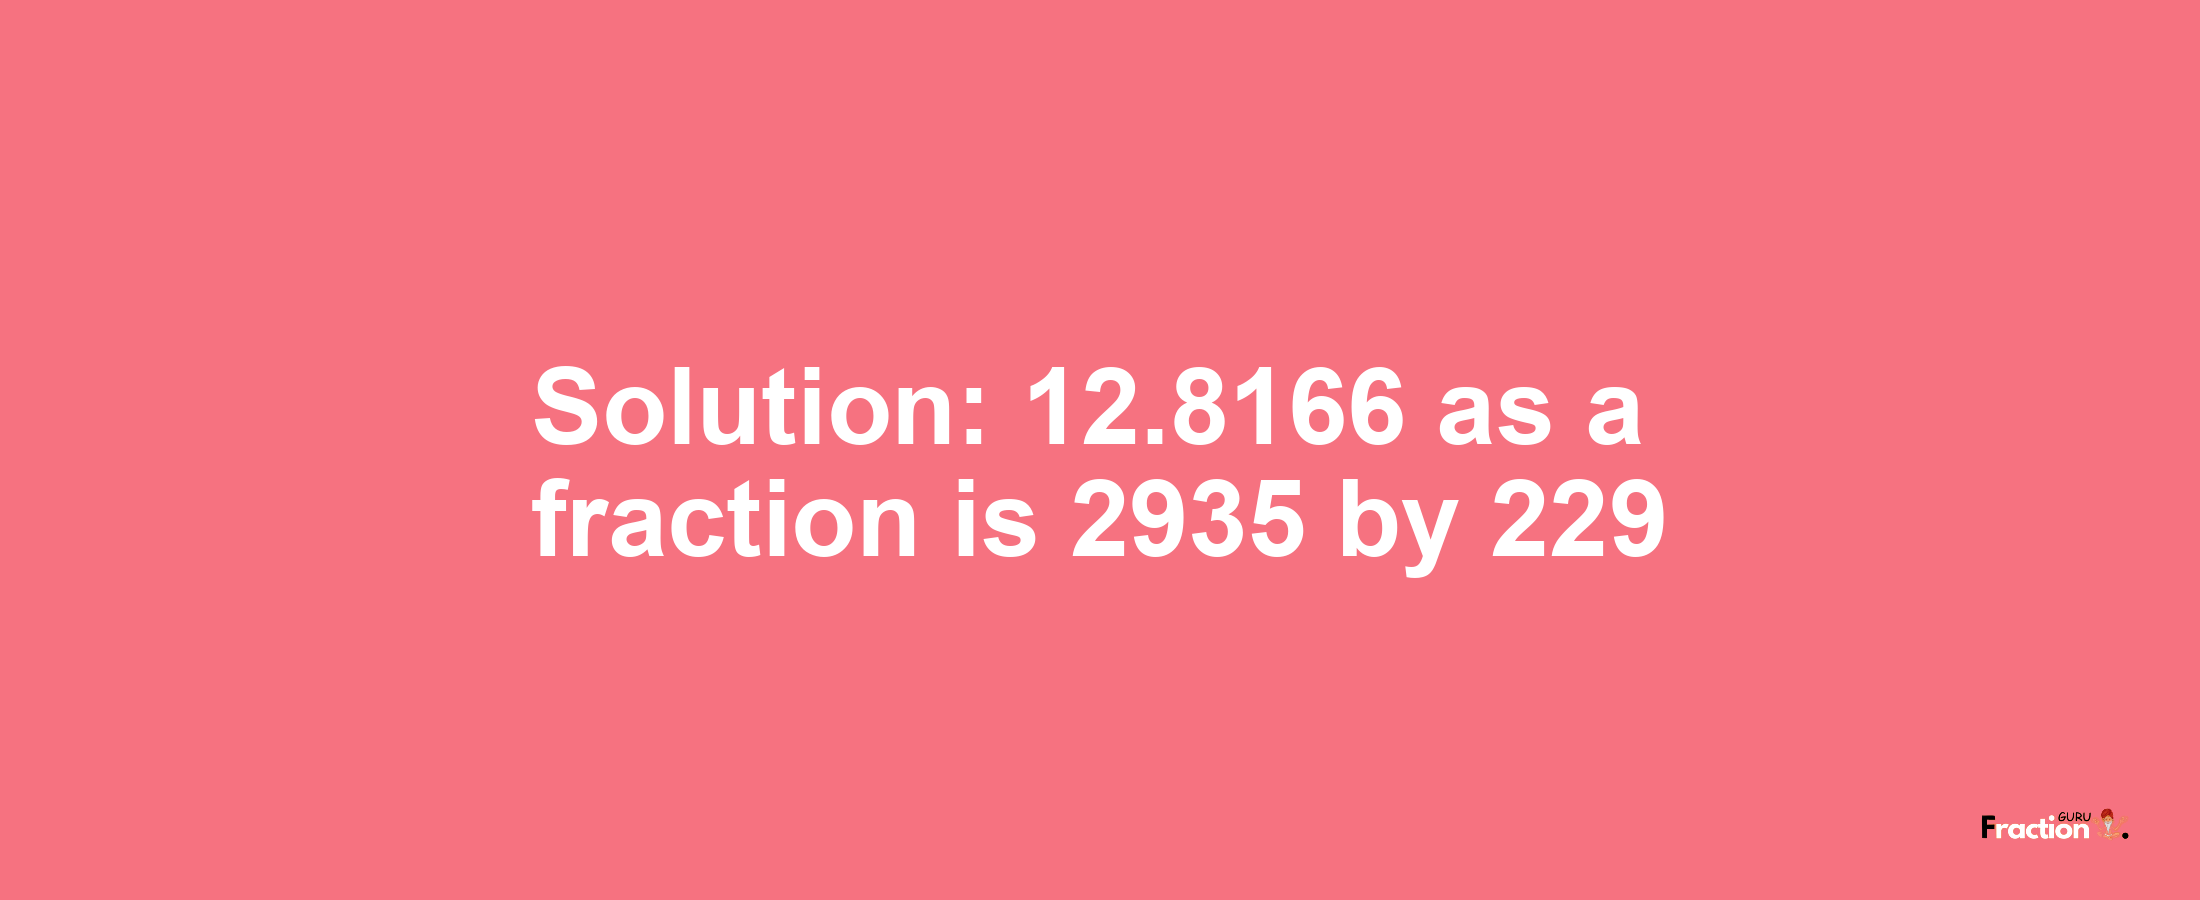 Solution:12.8166 as a fraction is 2935/229